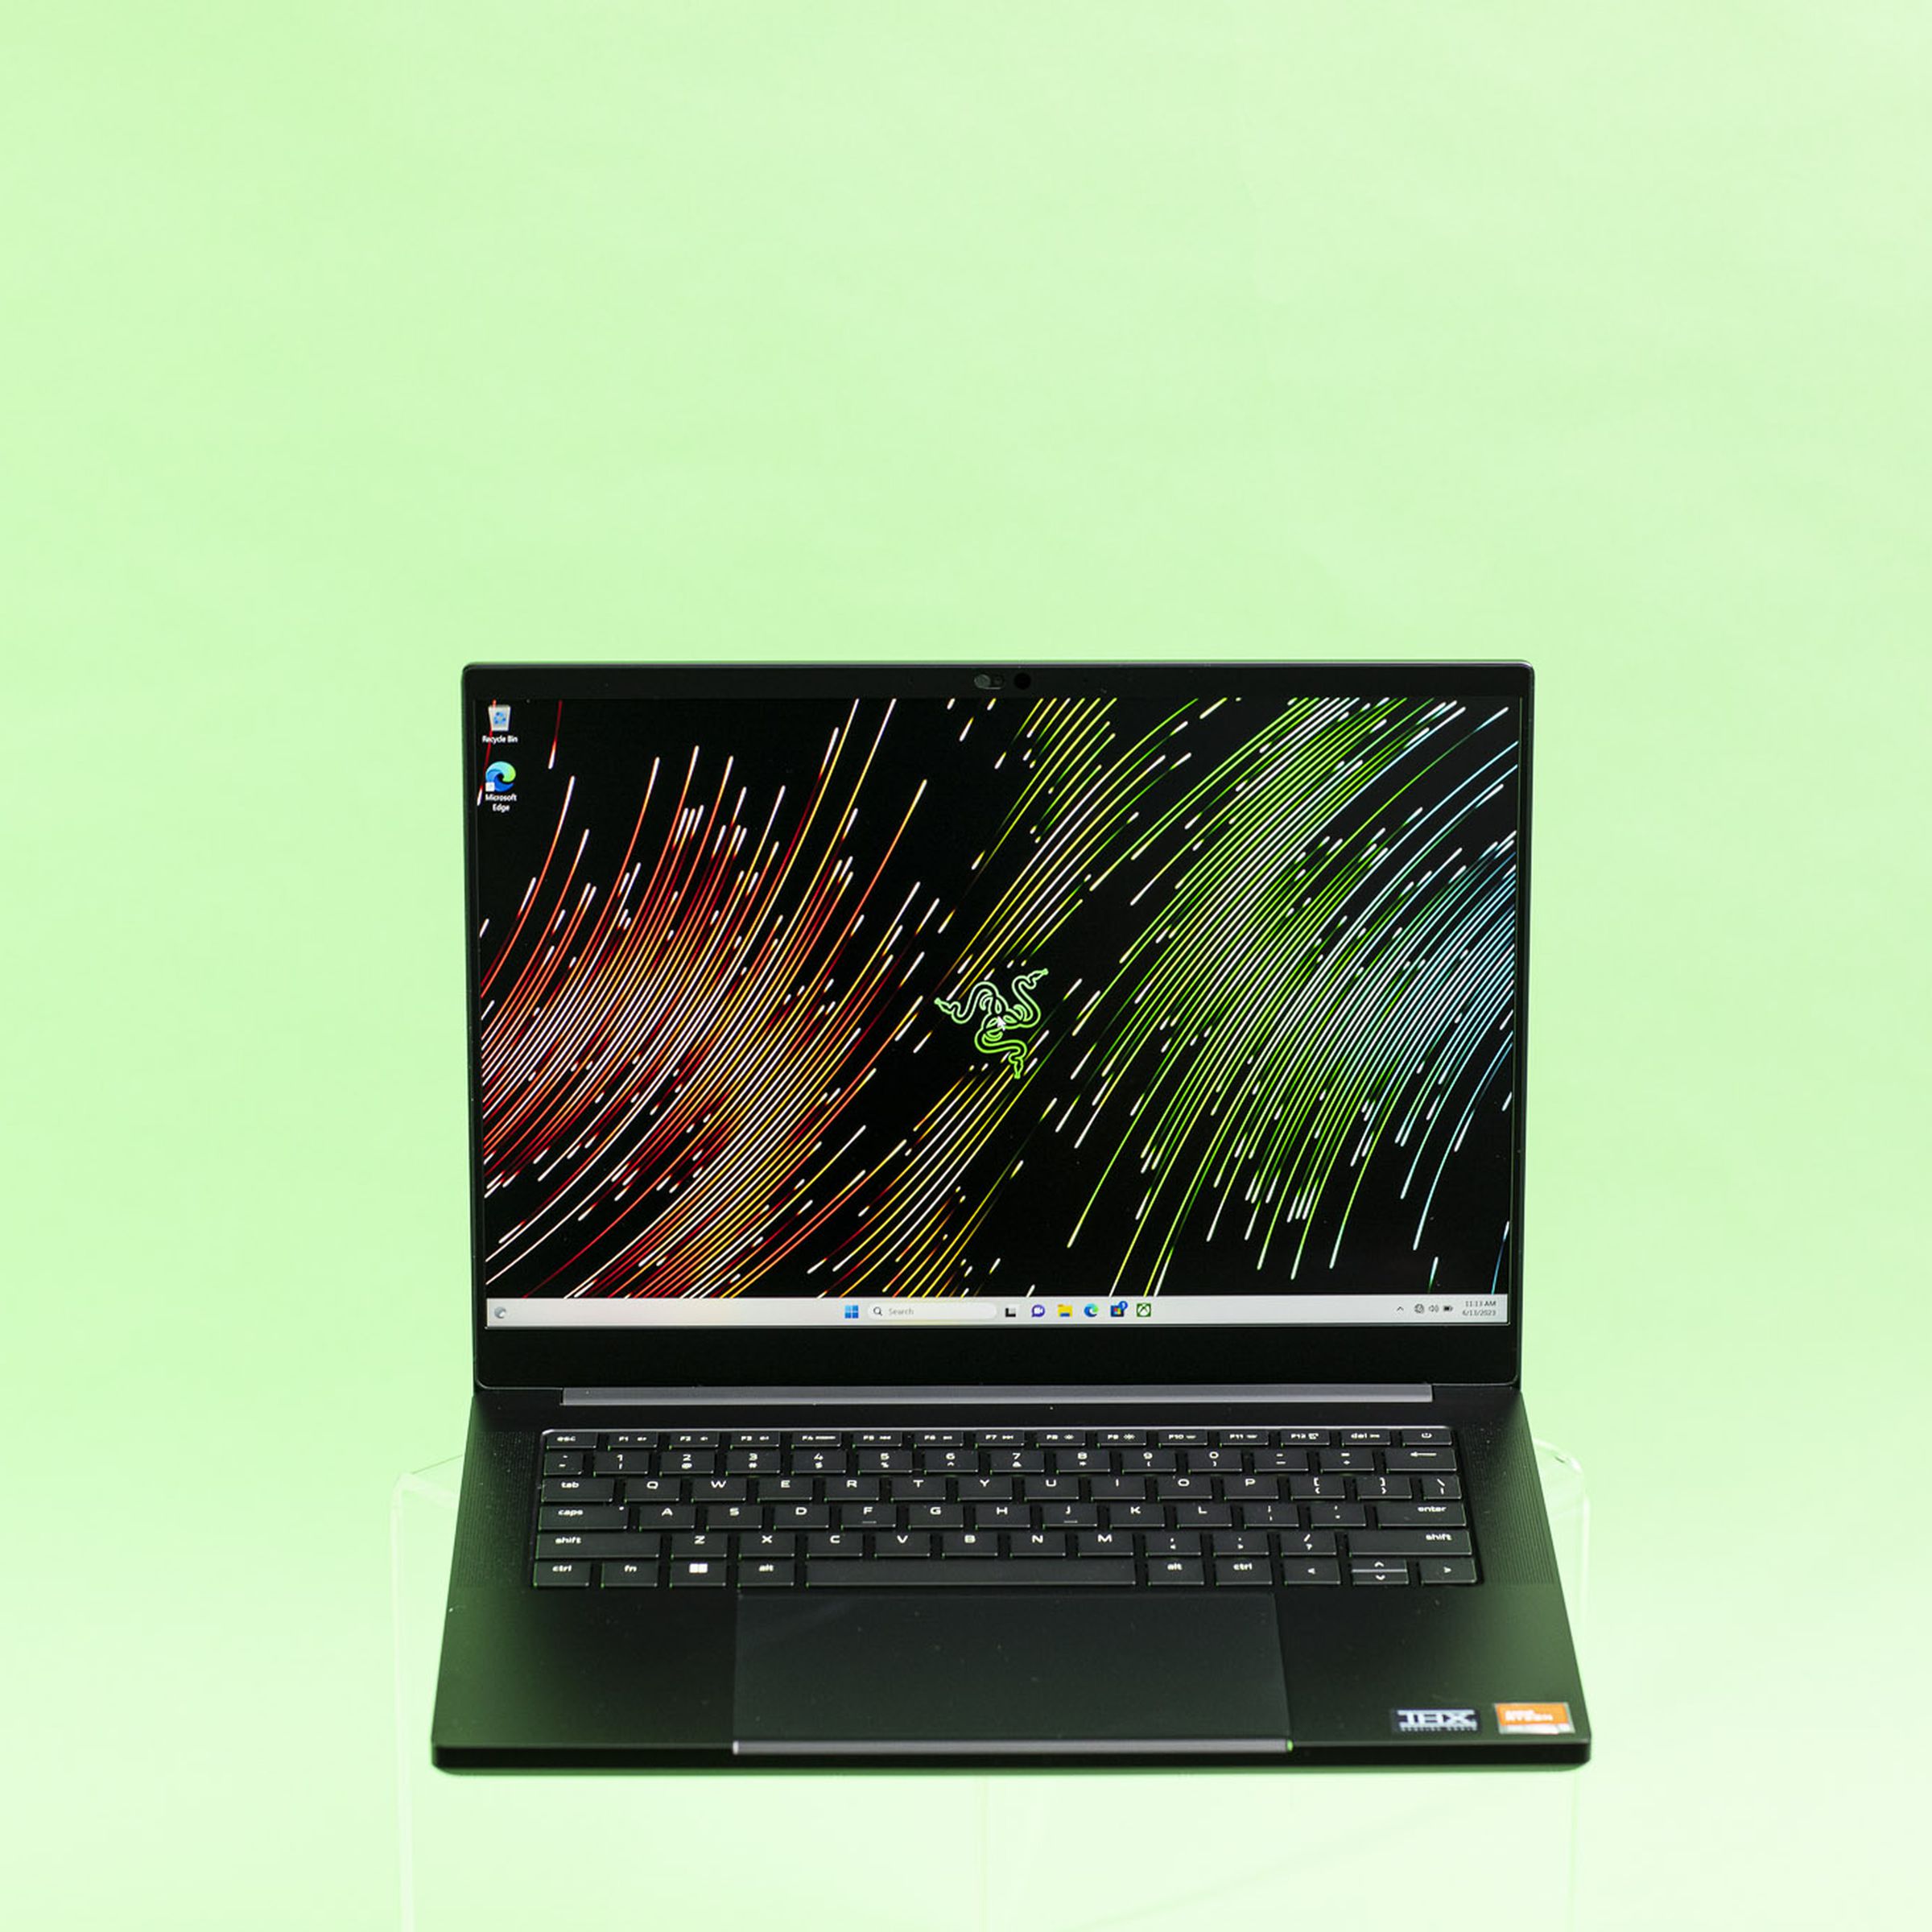 Razer Blade 14 seen from the front on a green background.